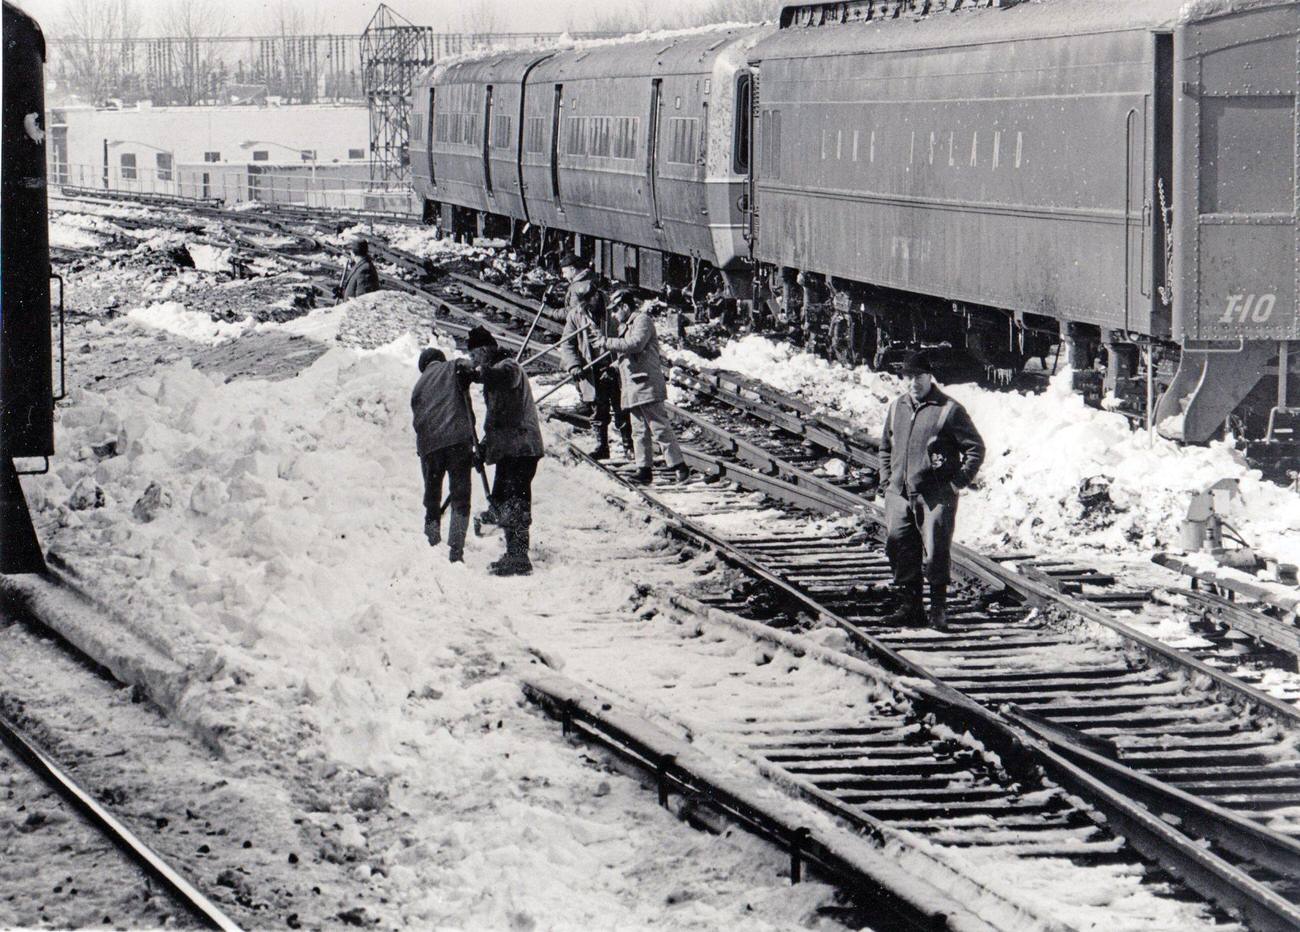 Track Crews Work With Shovels To Clear Snow From Switches And Third Rails Near The Jamaica, New York Station Of The Long Island Rail Road In On February 11, 1969.